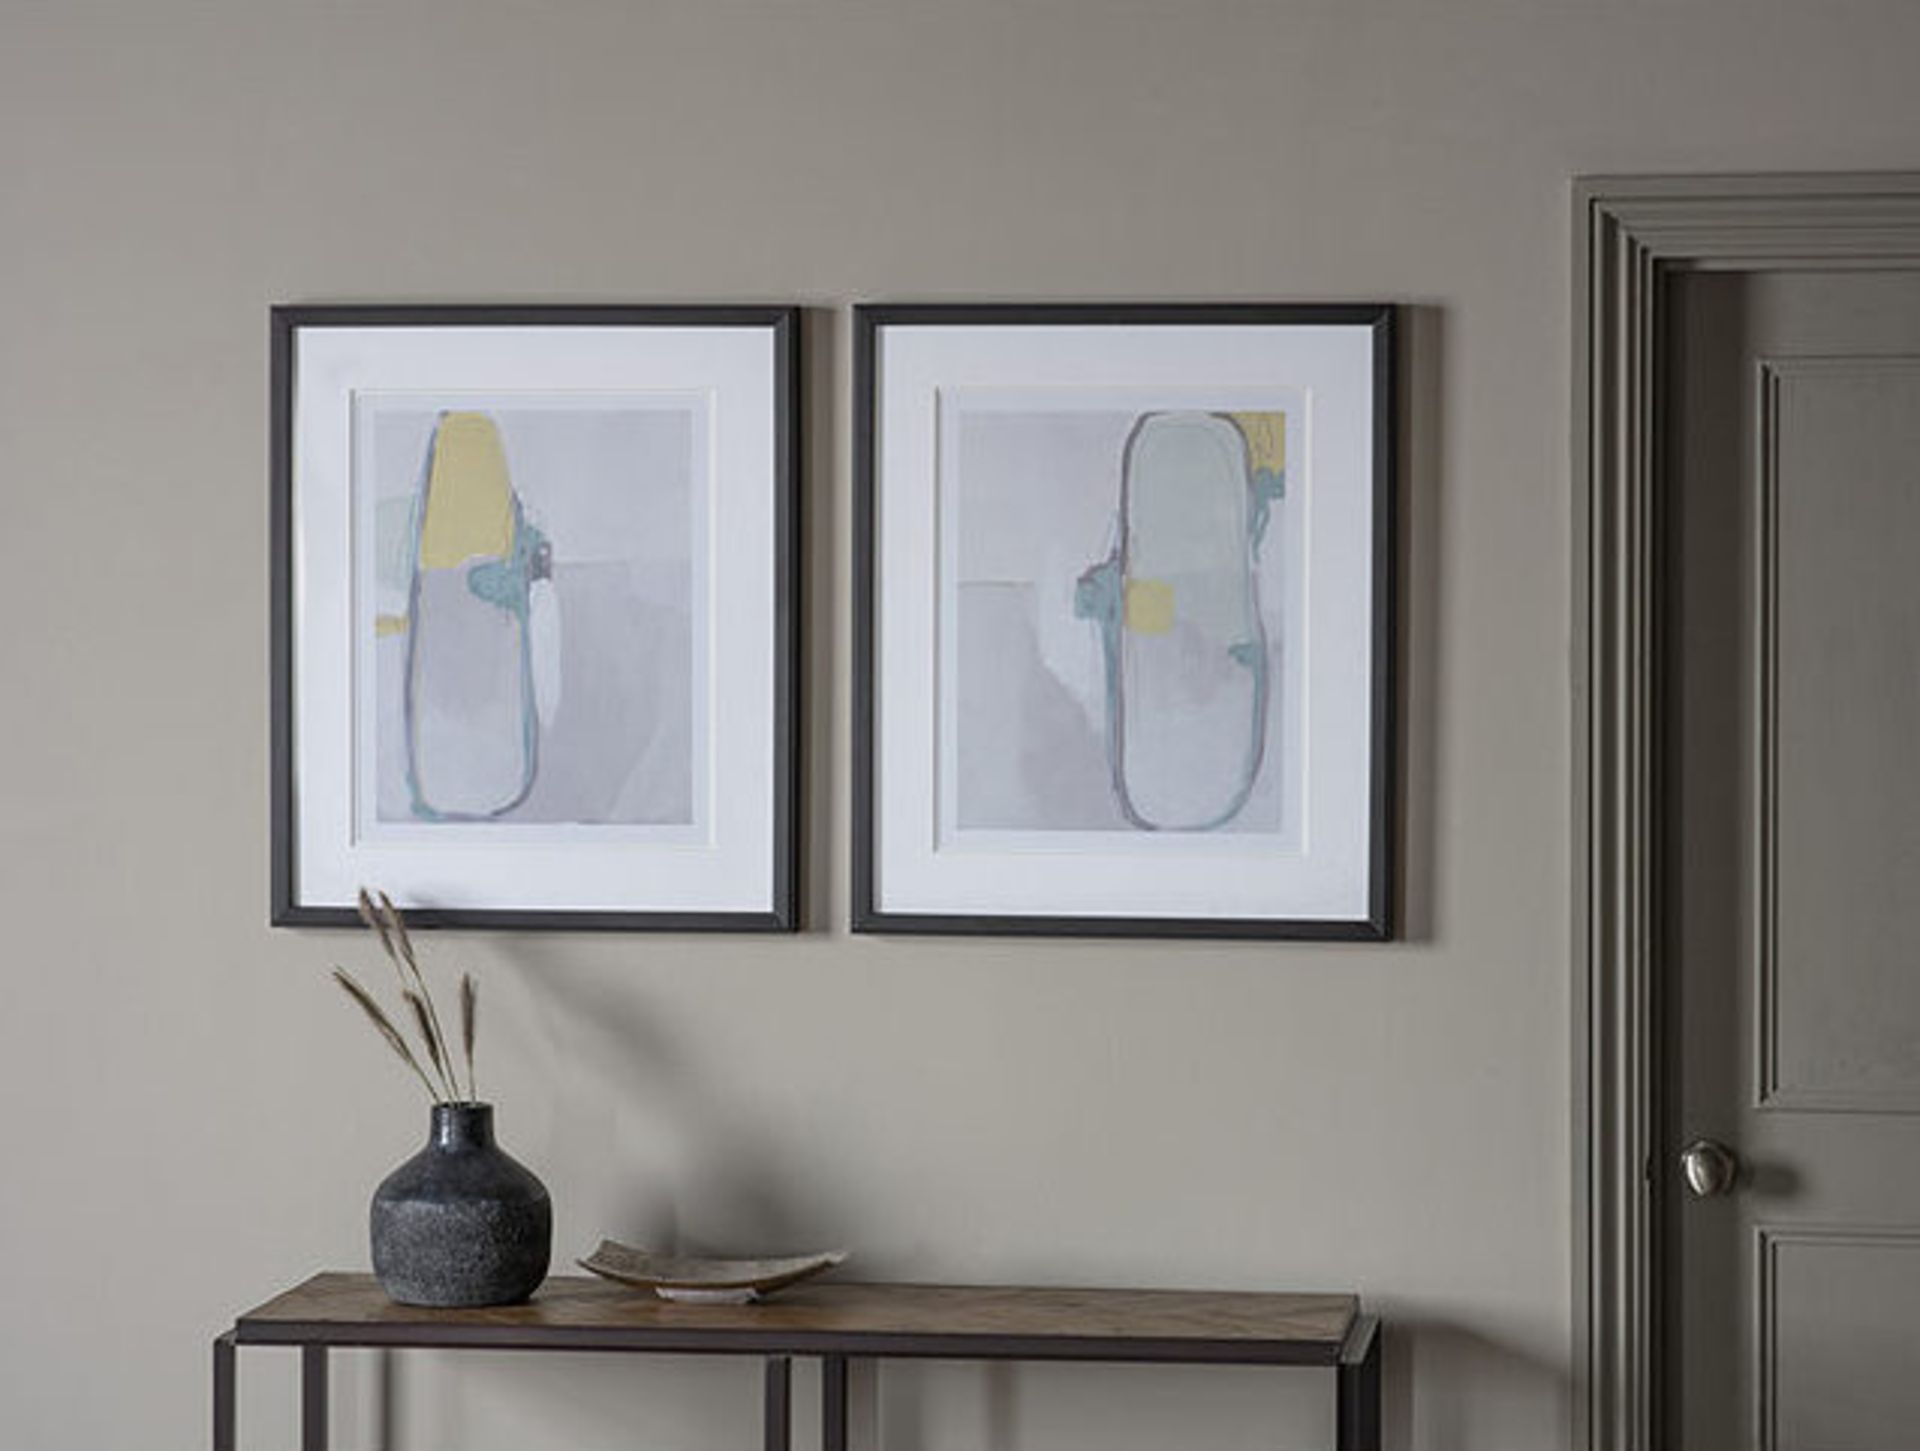 JOHN LEWIS SET OF 2 FRAMED ABSTRACT ART PRINTS - RRP £150 - Image 2 of 2